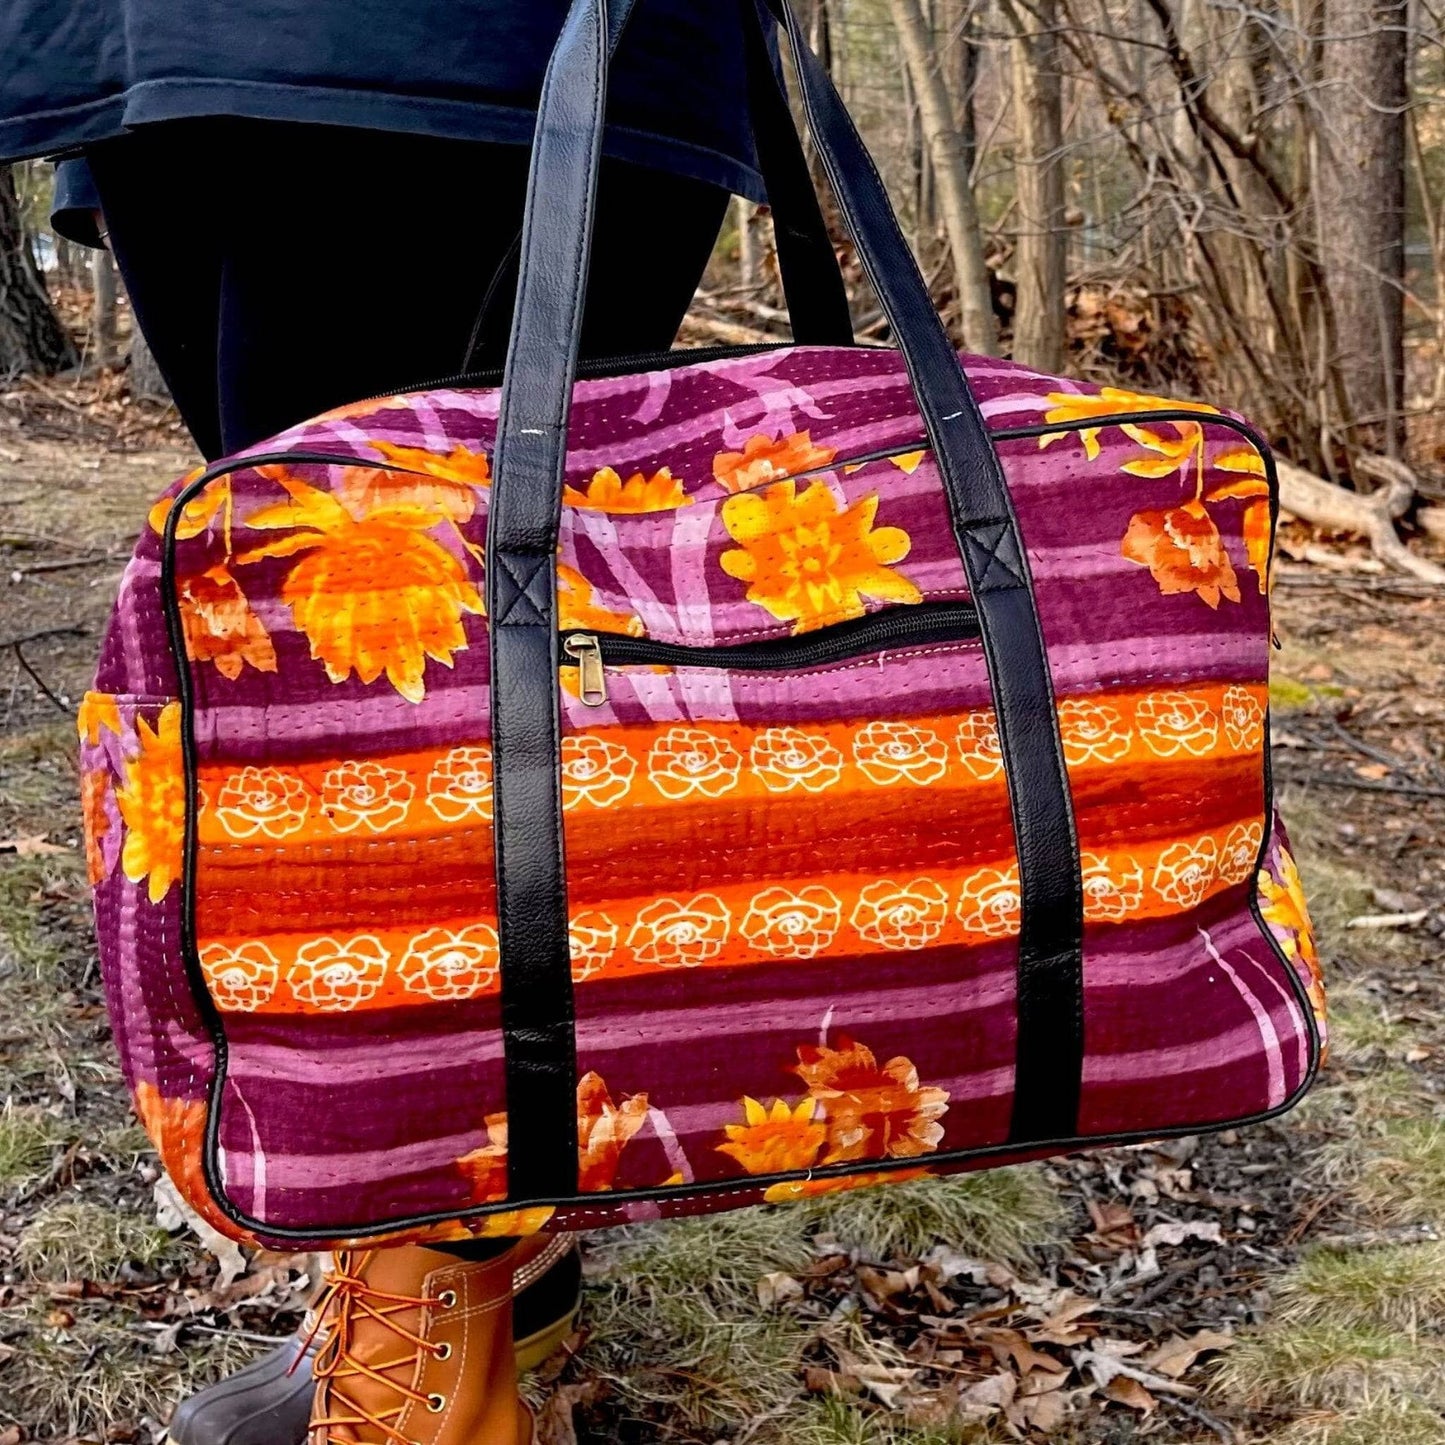 A Vibrant Purple and Orange Kantha Stitched Duffle Bag with Flowers on it.